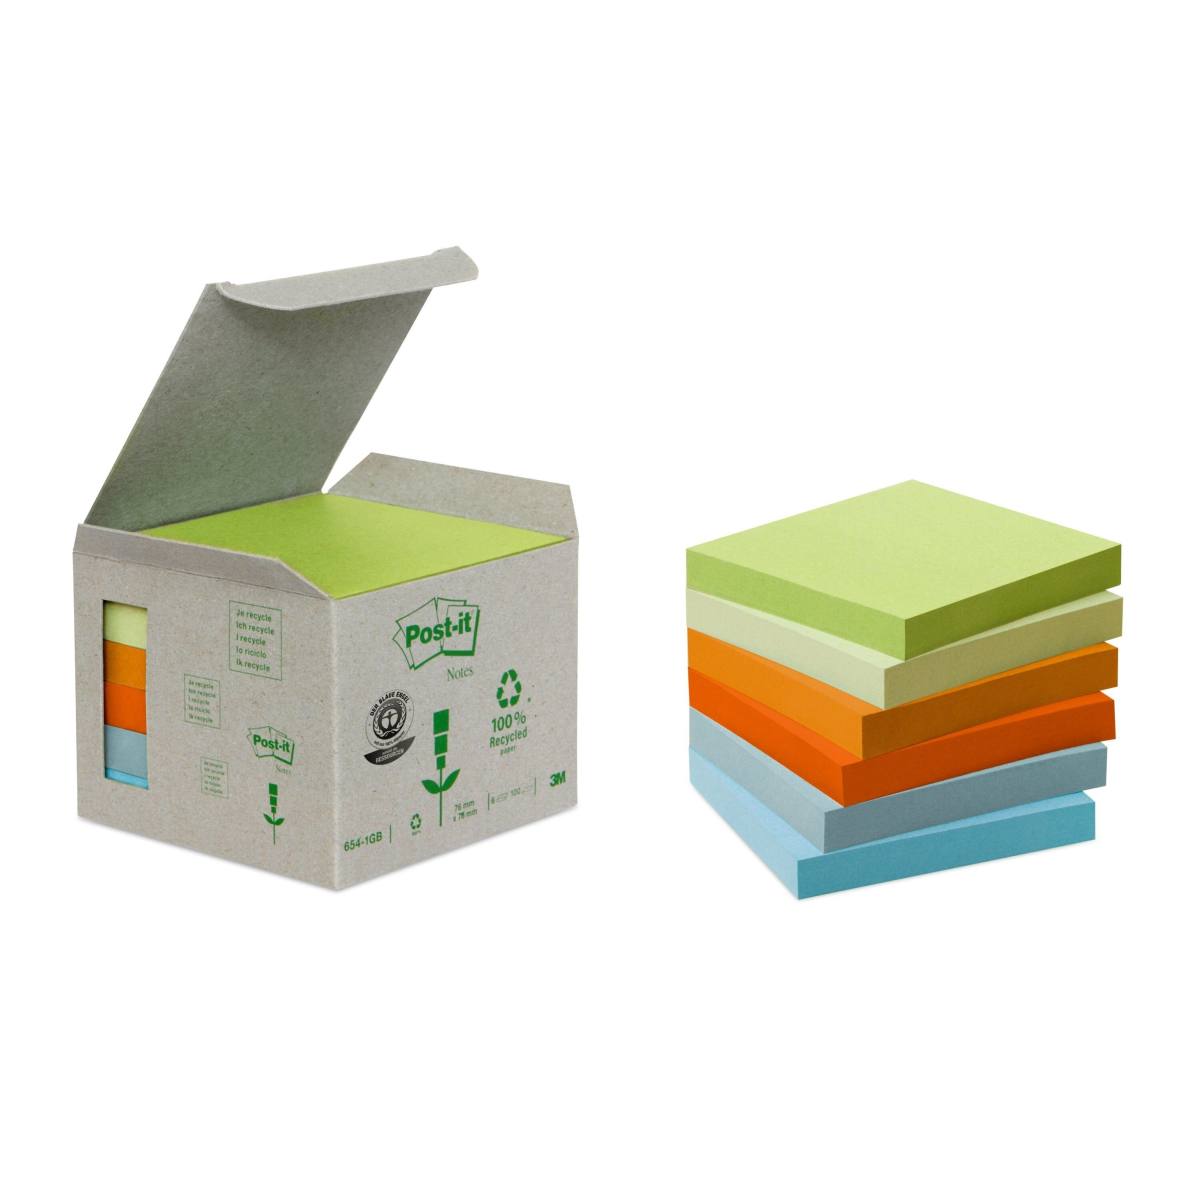 3M Post-it Recycling Notes 654-1GB, 76 mm x 76 mm, various colours, 6 pads of 100 sheets each